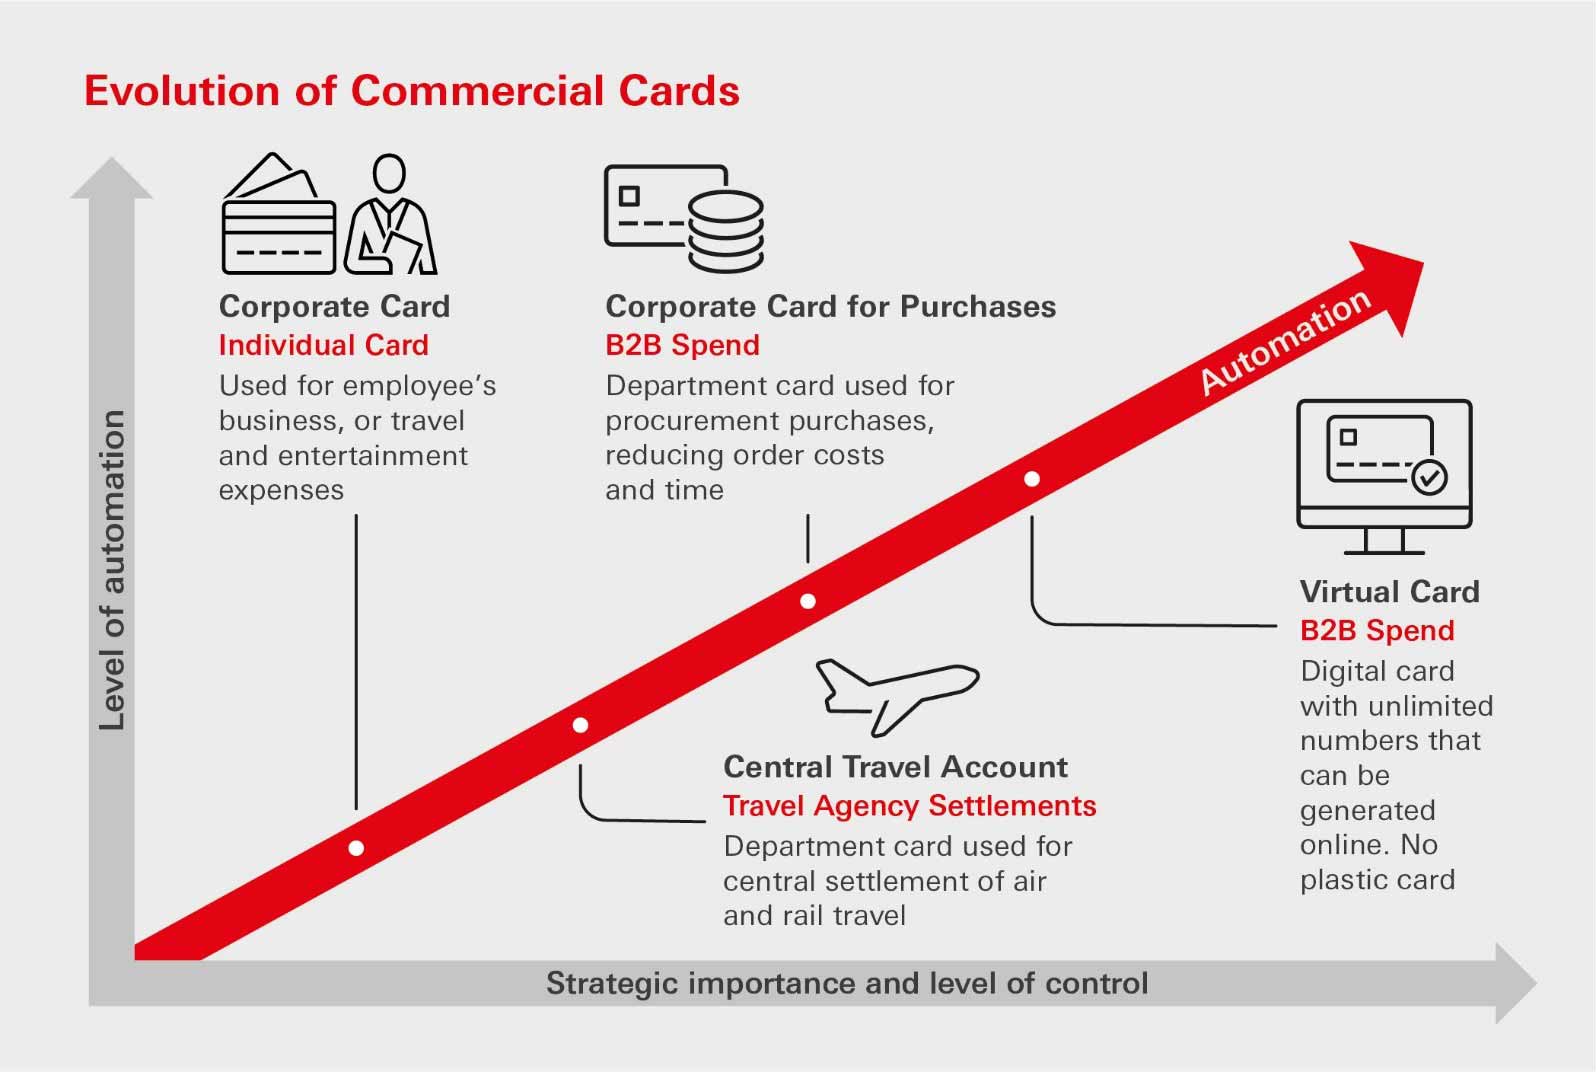 The evolution of Commercial Cards